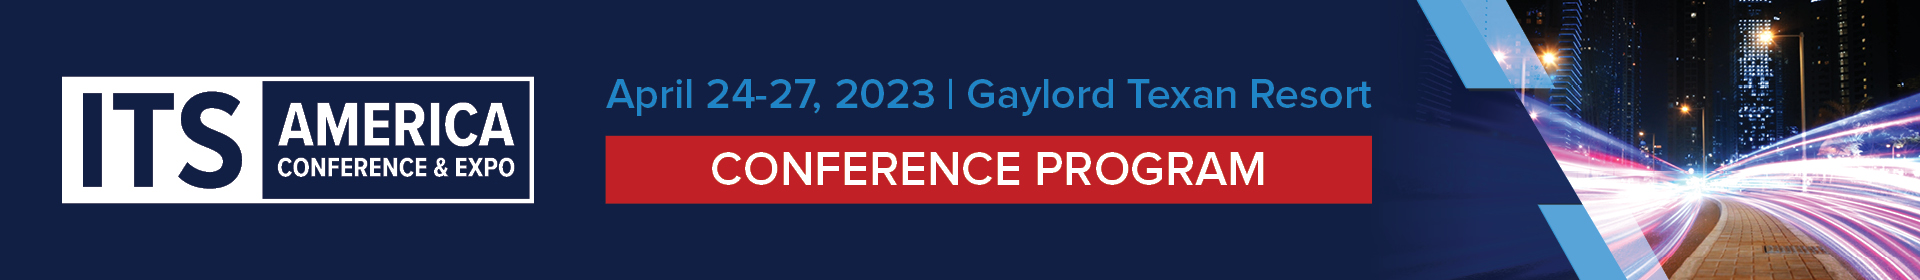 ITS America Conference & Expo 2023 Event Banner